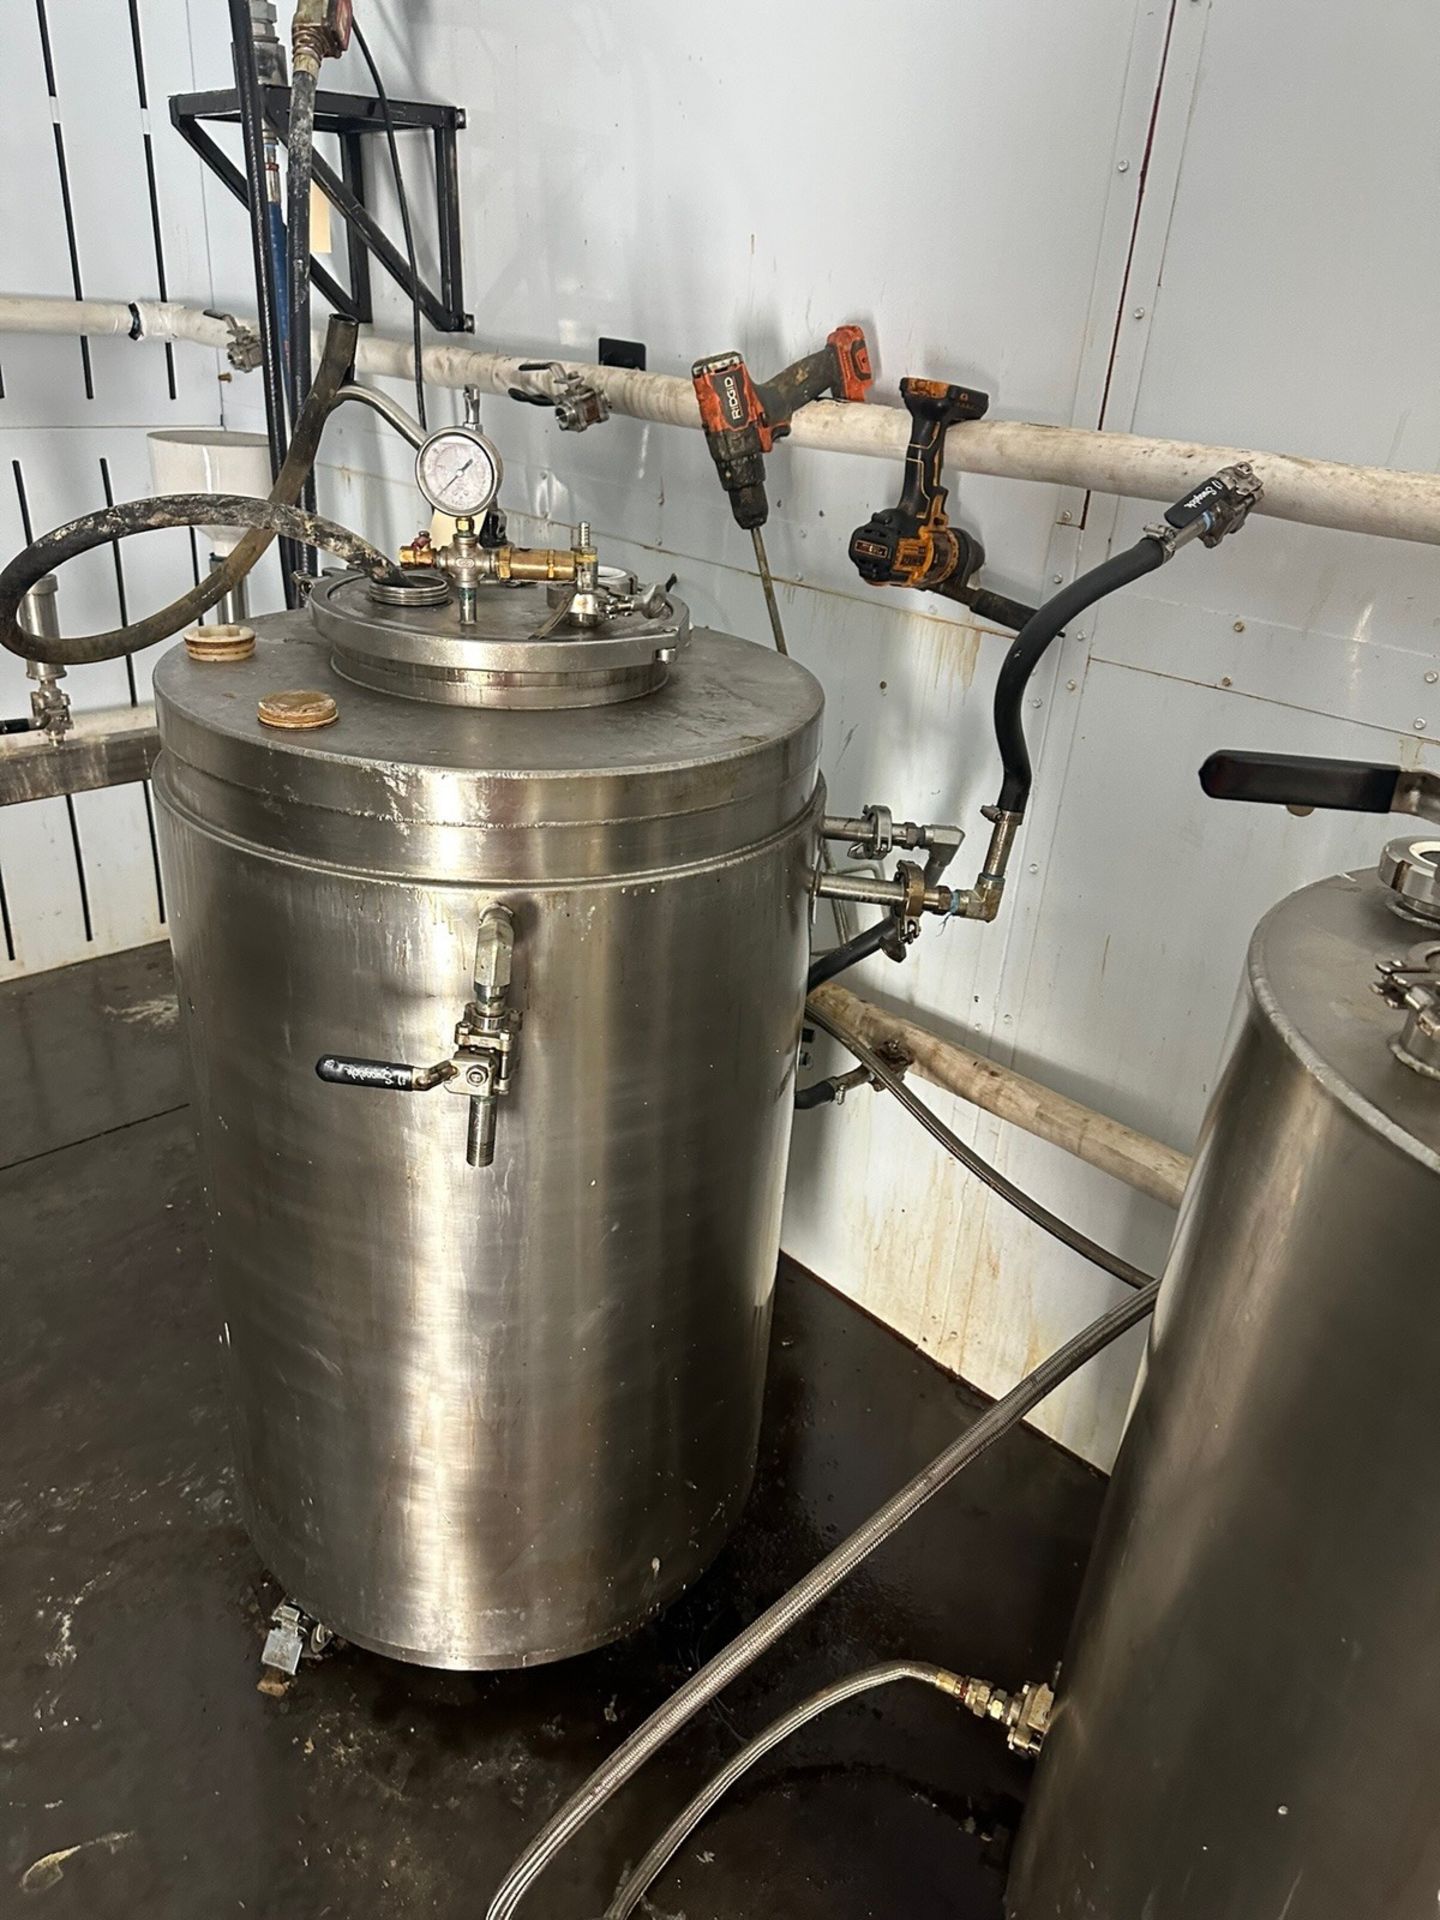 400L Stainless Steel Vessel | Rig Fee $125 - Image 4 of 4